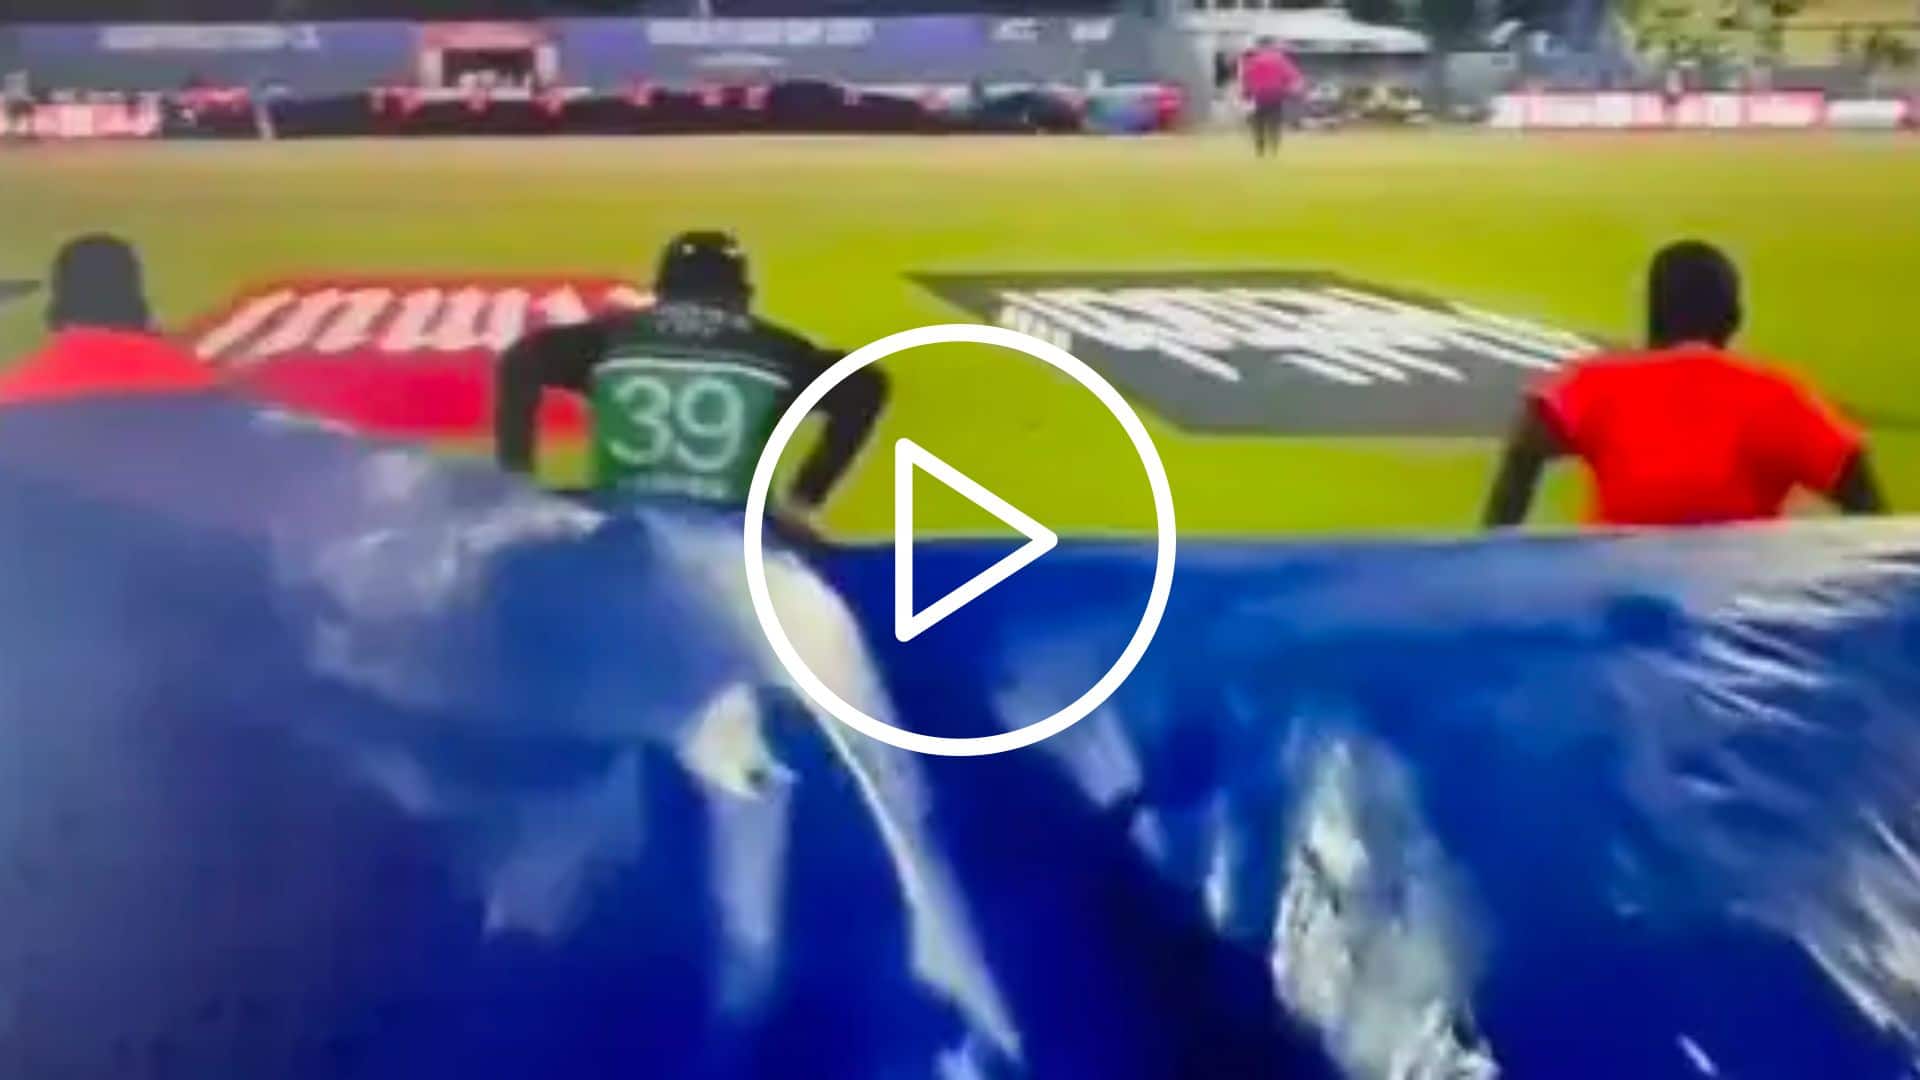 [Watch] Fakhar Zaman Joins Groundsmen to Cover Pitch Amidst Sudden Rainfall in IND vs PAK